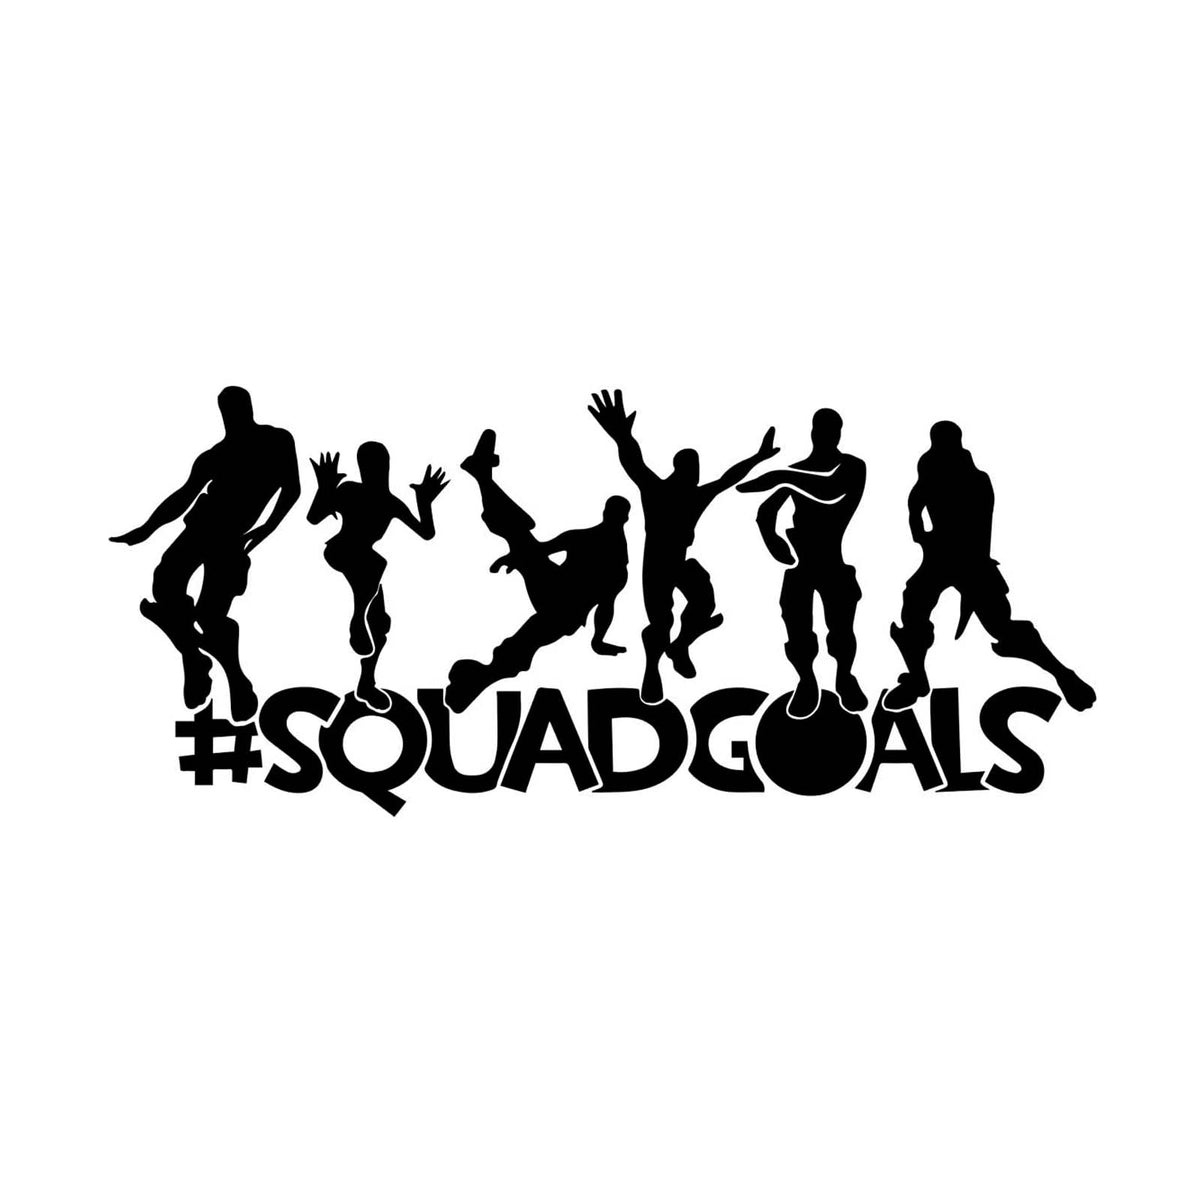 Signature #SquadGoals 💪 👉Scroll for what happens when you're